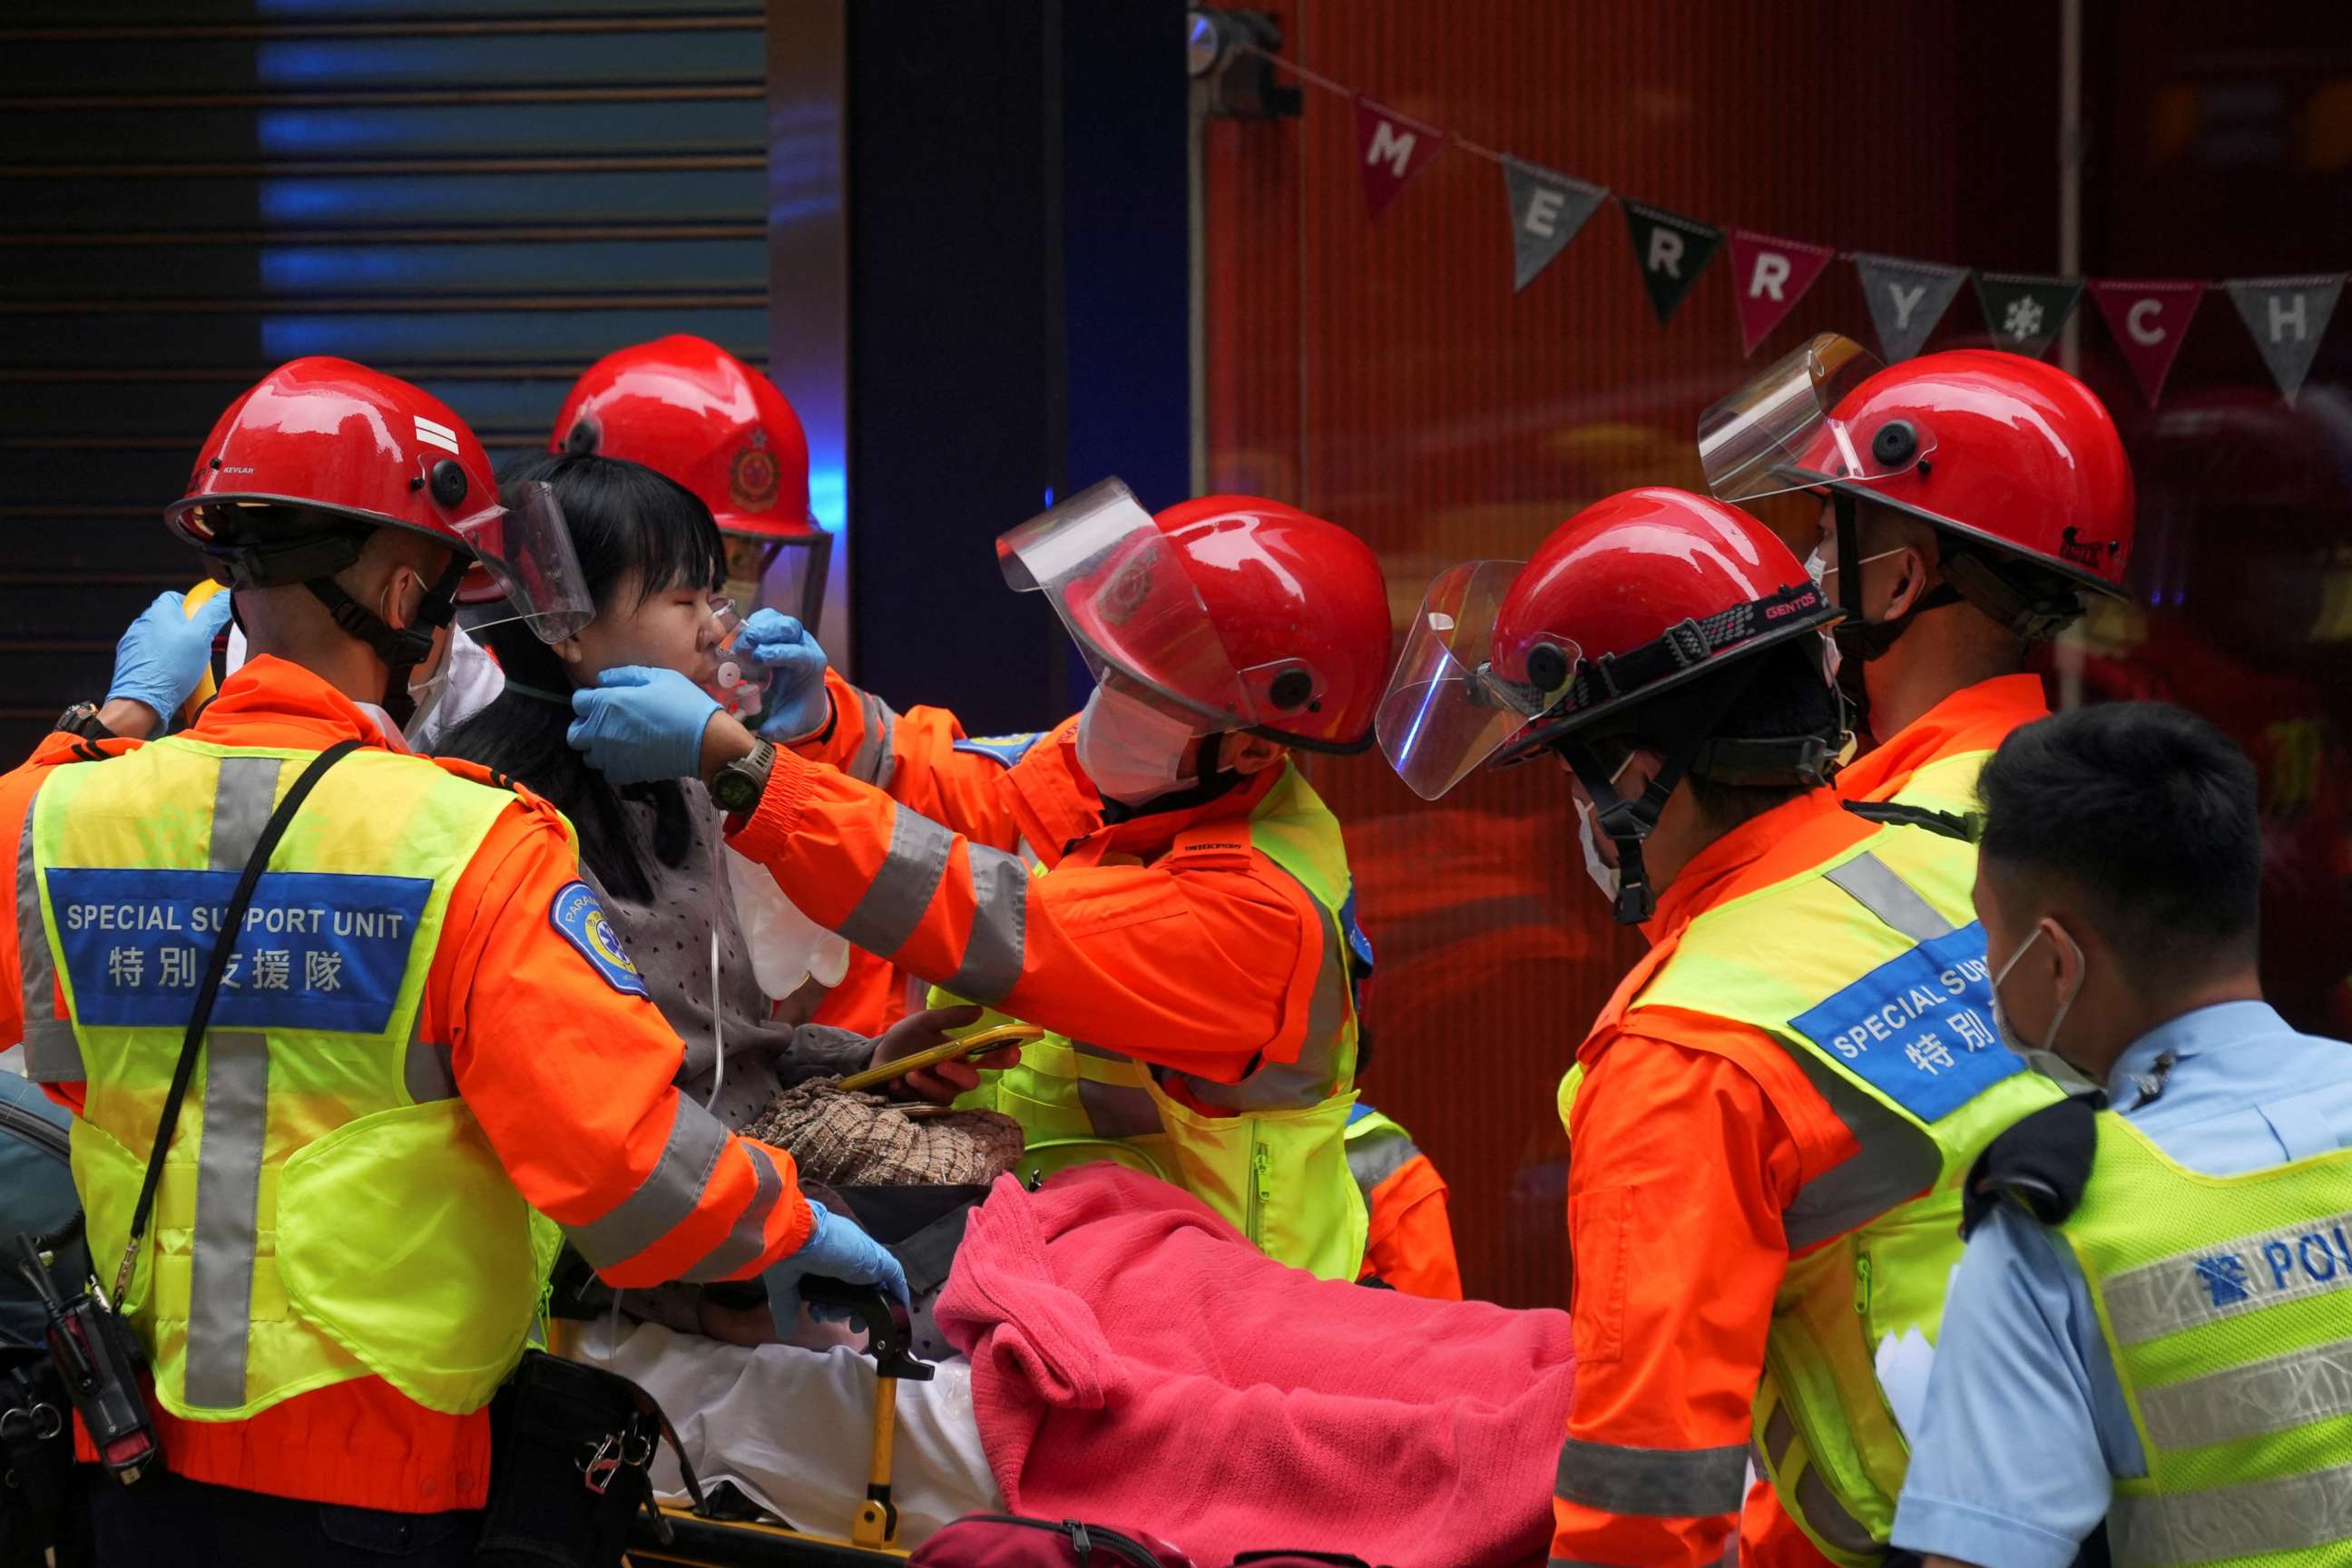 PHOTO: Rescue workers help a person on a stretcher after a fire broke out at the World Trade Centre in Hong Kong, China, on Dec. 15, 2021.